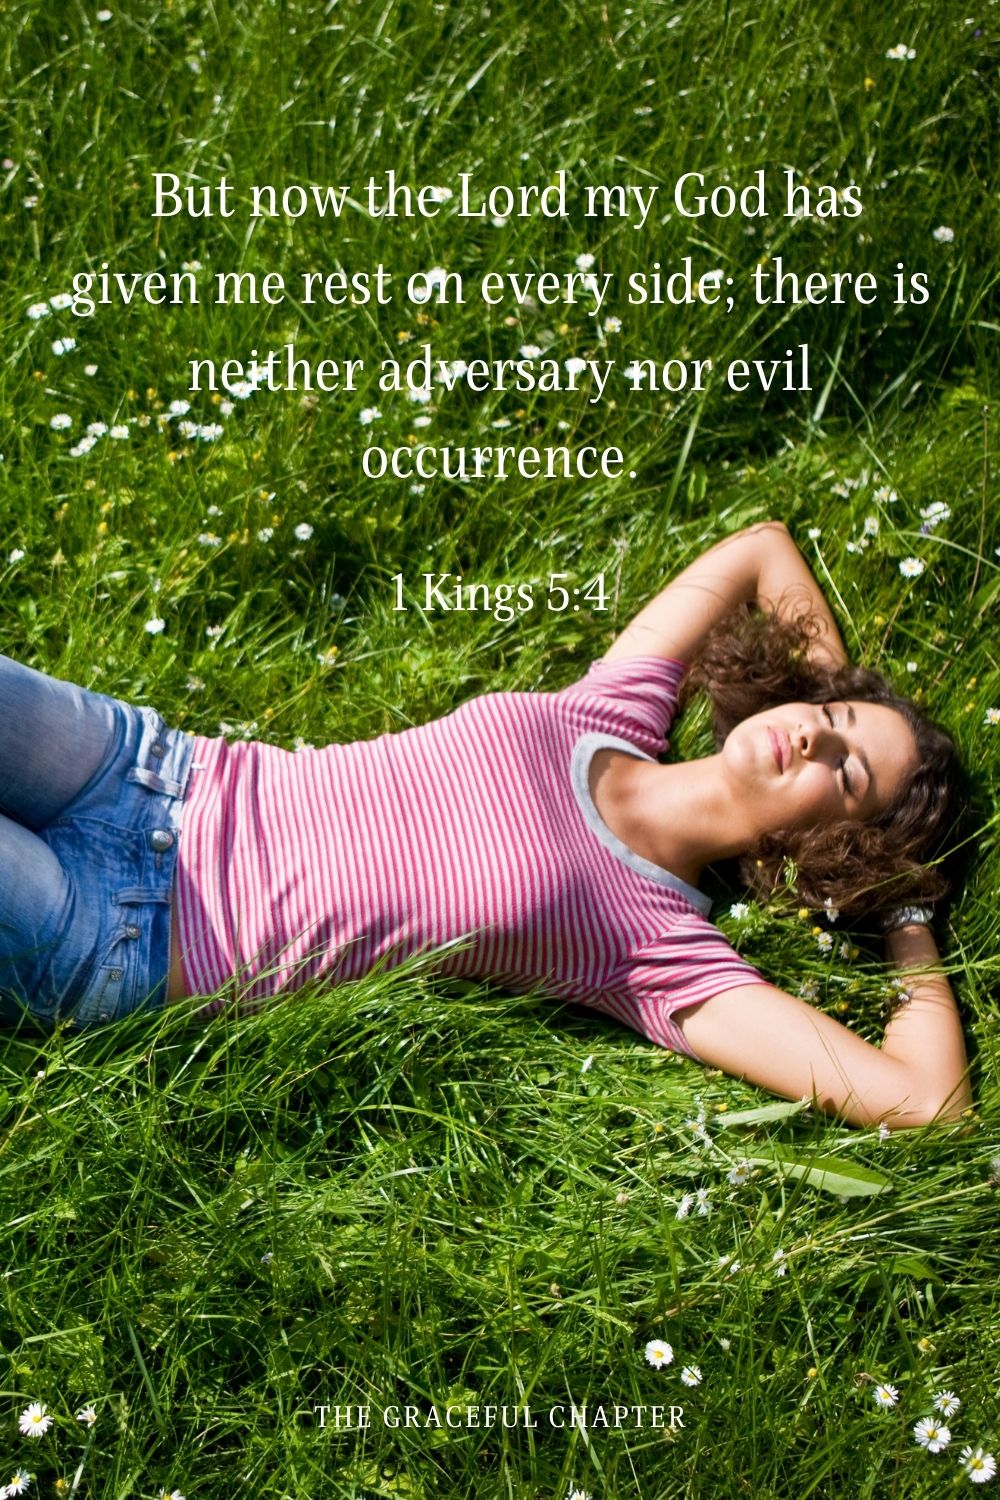 But now the Lord my God has given me rest on every side; there is neither adversary nor evil occurrence.